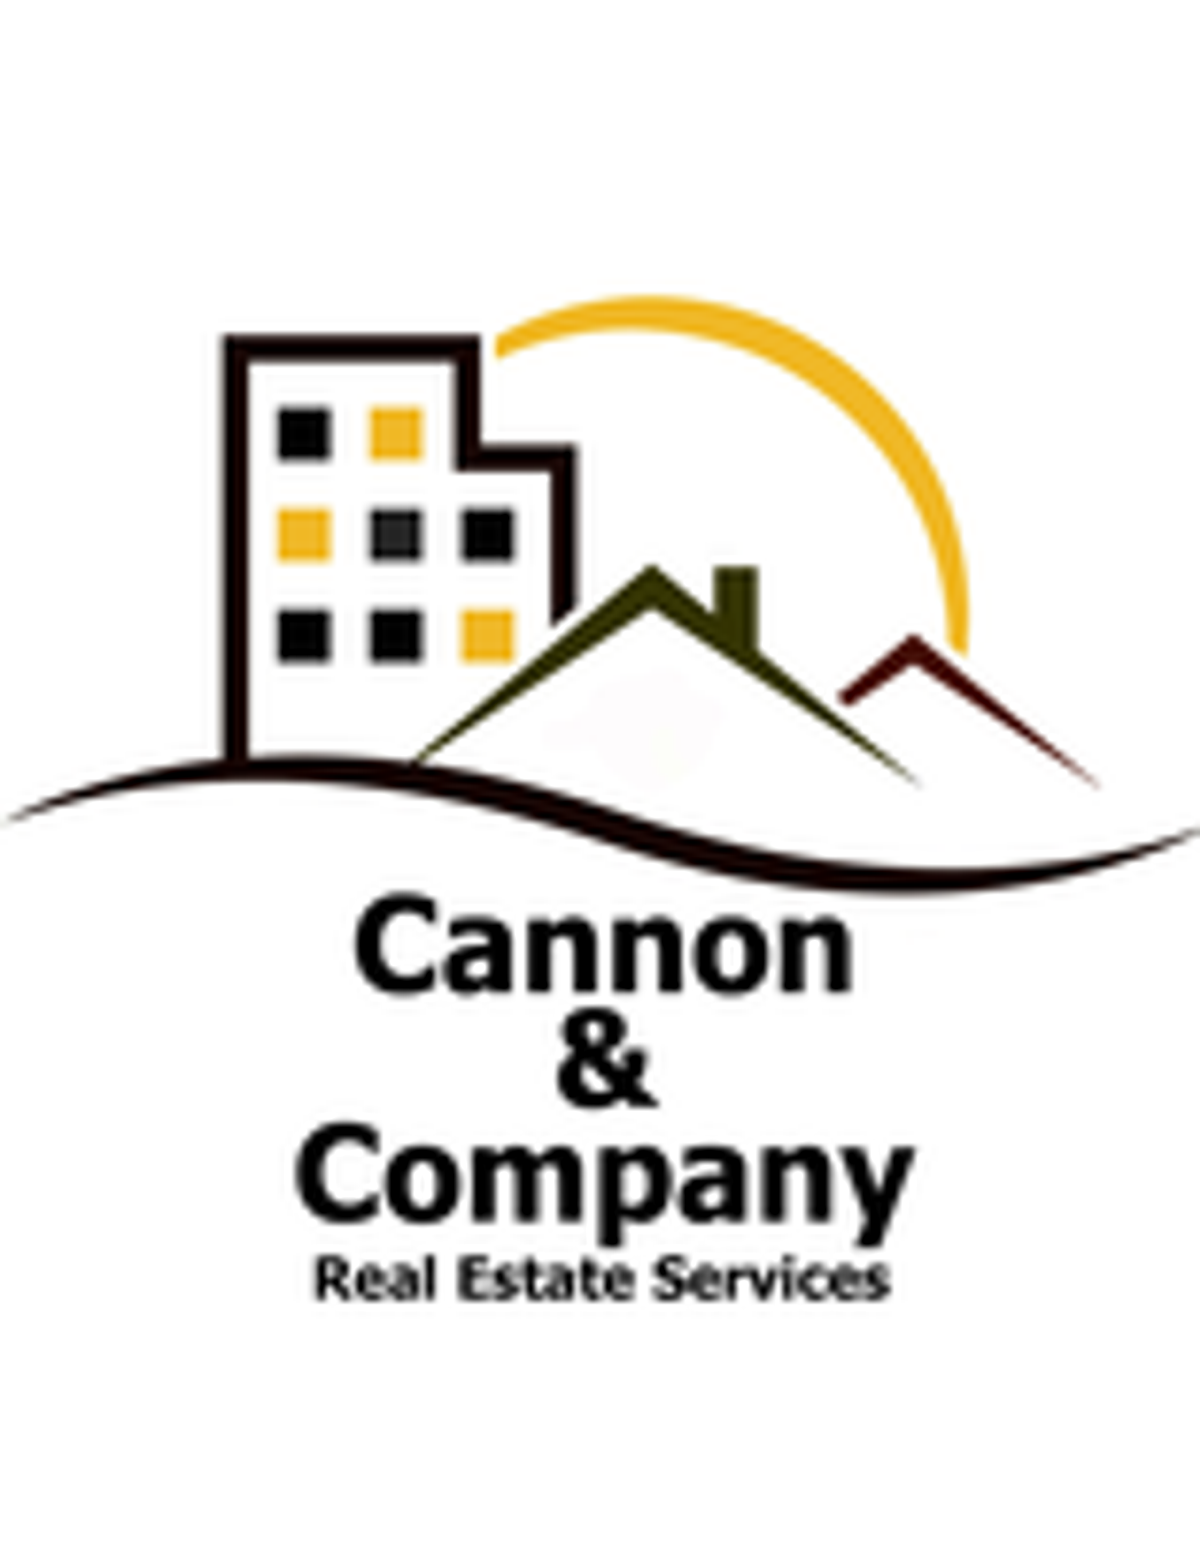 Photo for Kathia Bair, Listing Agent at Cannon & Company